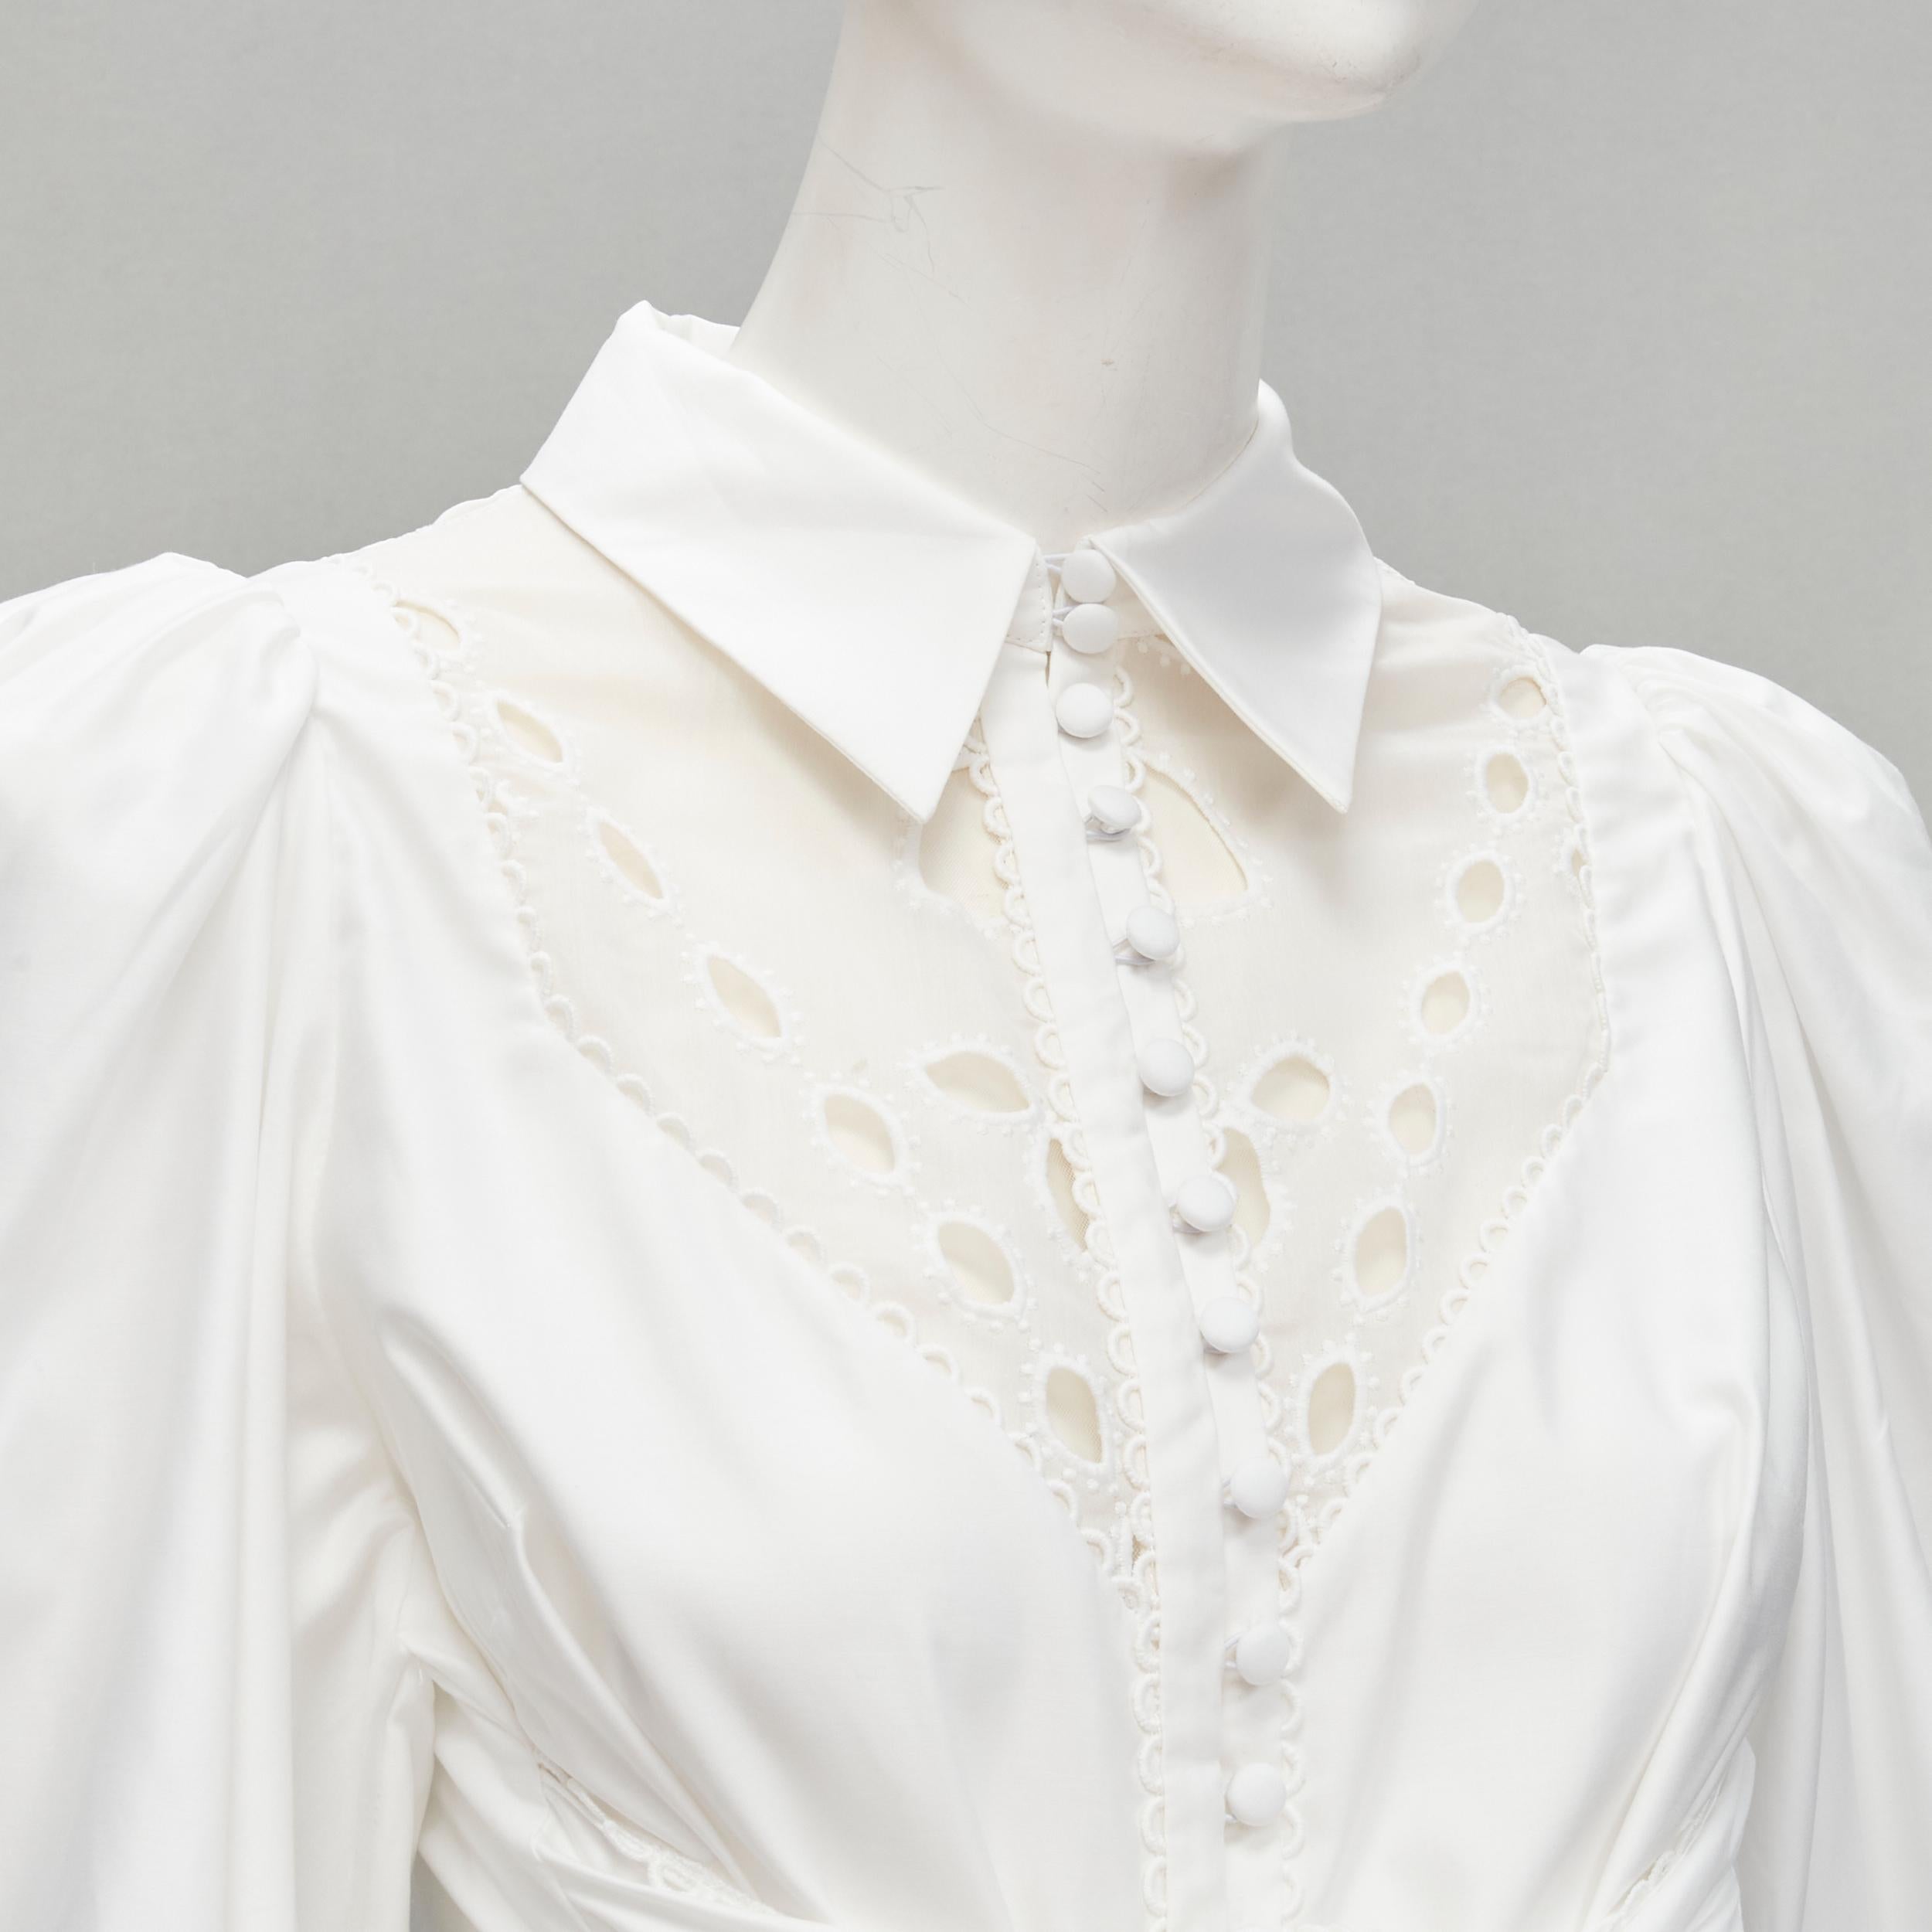 ACLER white cotton eyelet cutout big bow puff sleeve blouse US2 S
Reference: AAWC/A00274
Brand: Acler
Material: Cotton
Color: White
Pattern: Solid
Closure: Button
Extra Details: Row of button closure at neck may need time to finish.
Made in: